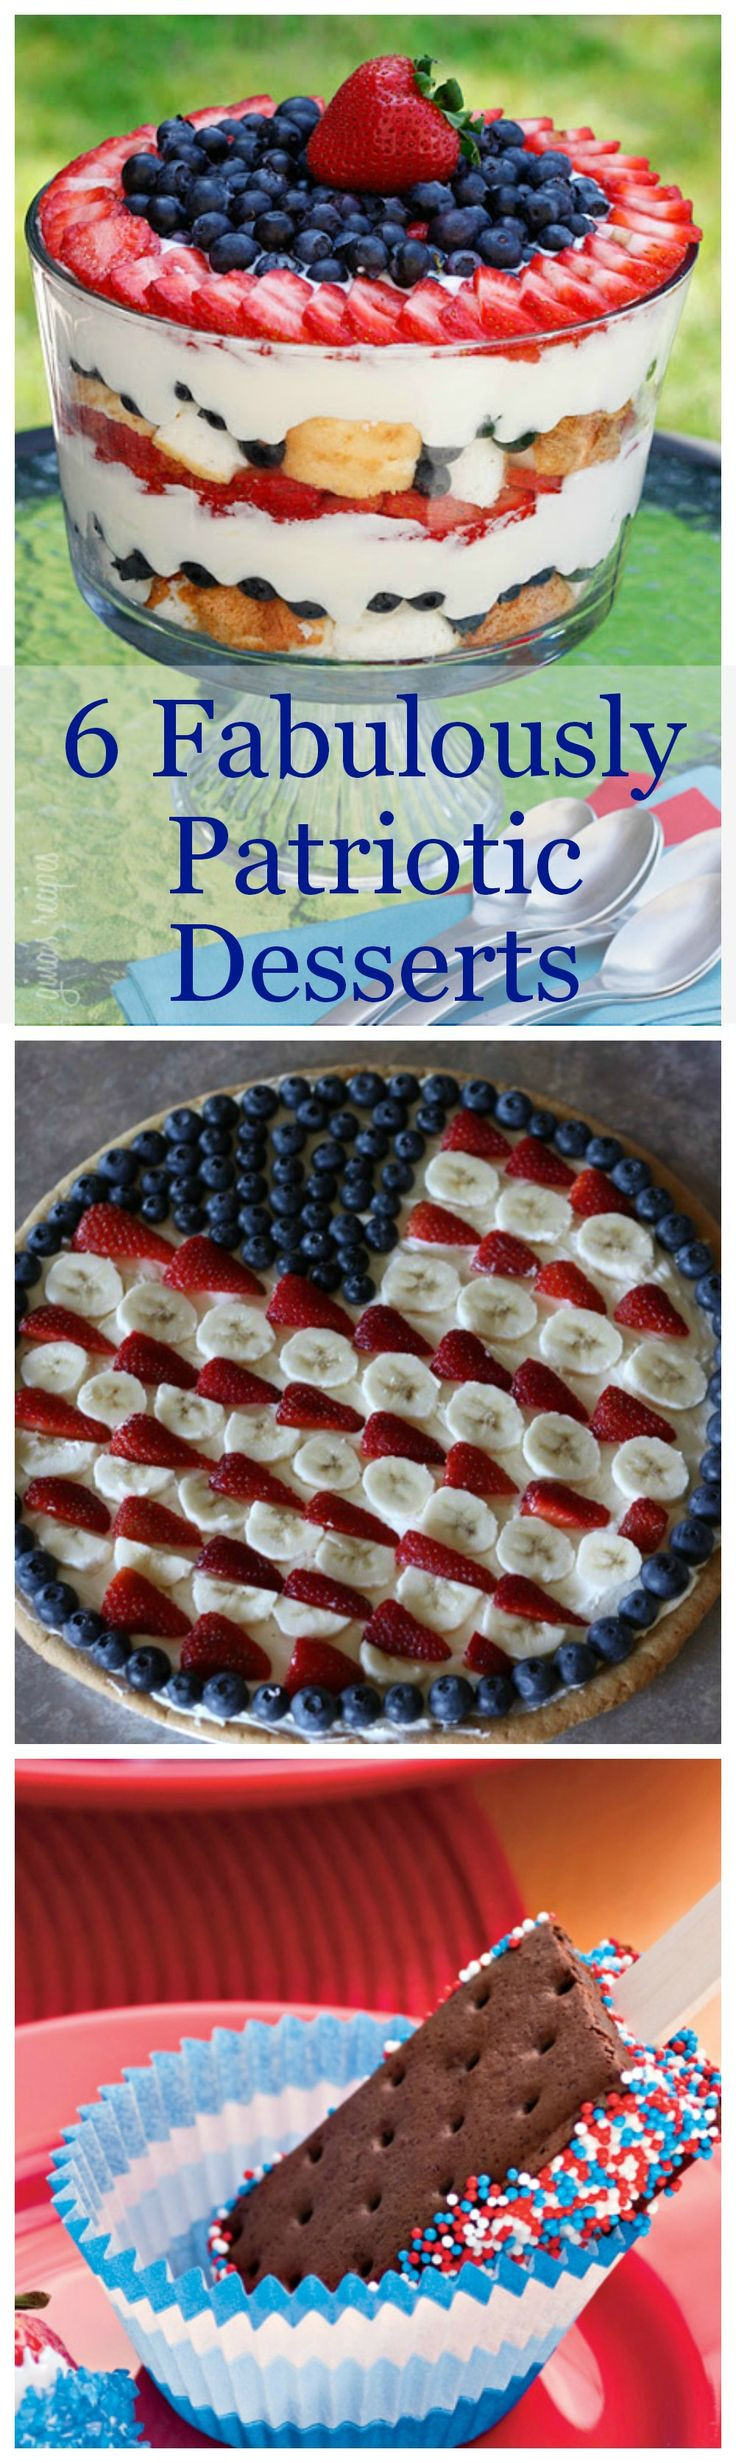 Desserts For 4Th Of July
 Last Minute 4th of July Dessert Ideas